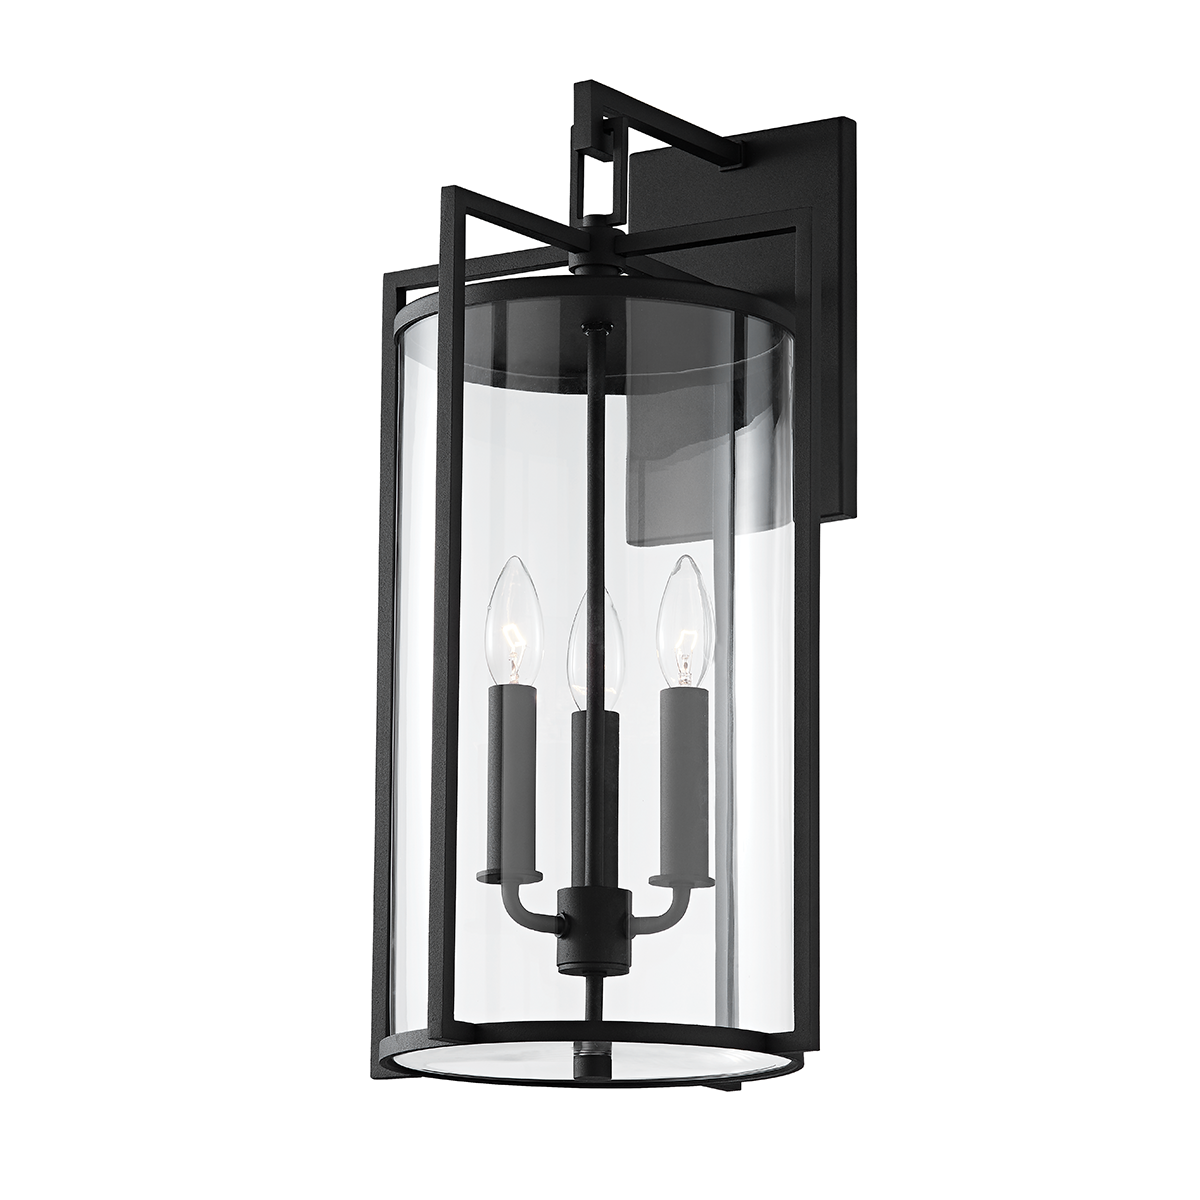 Troy Lighting 3 LIGHT LARGE EXTERIOR WALL SCONCE B1143